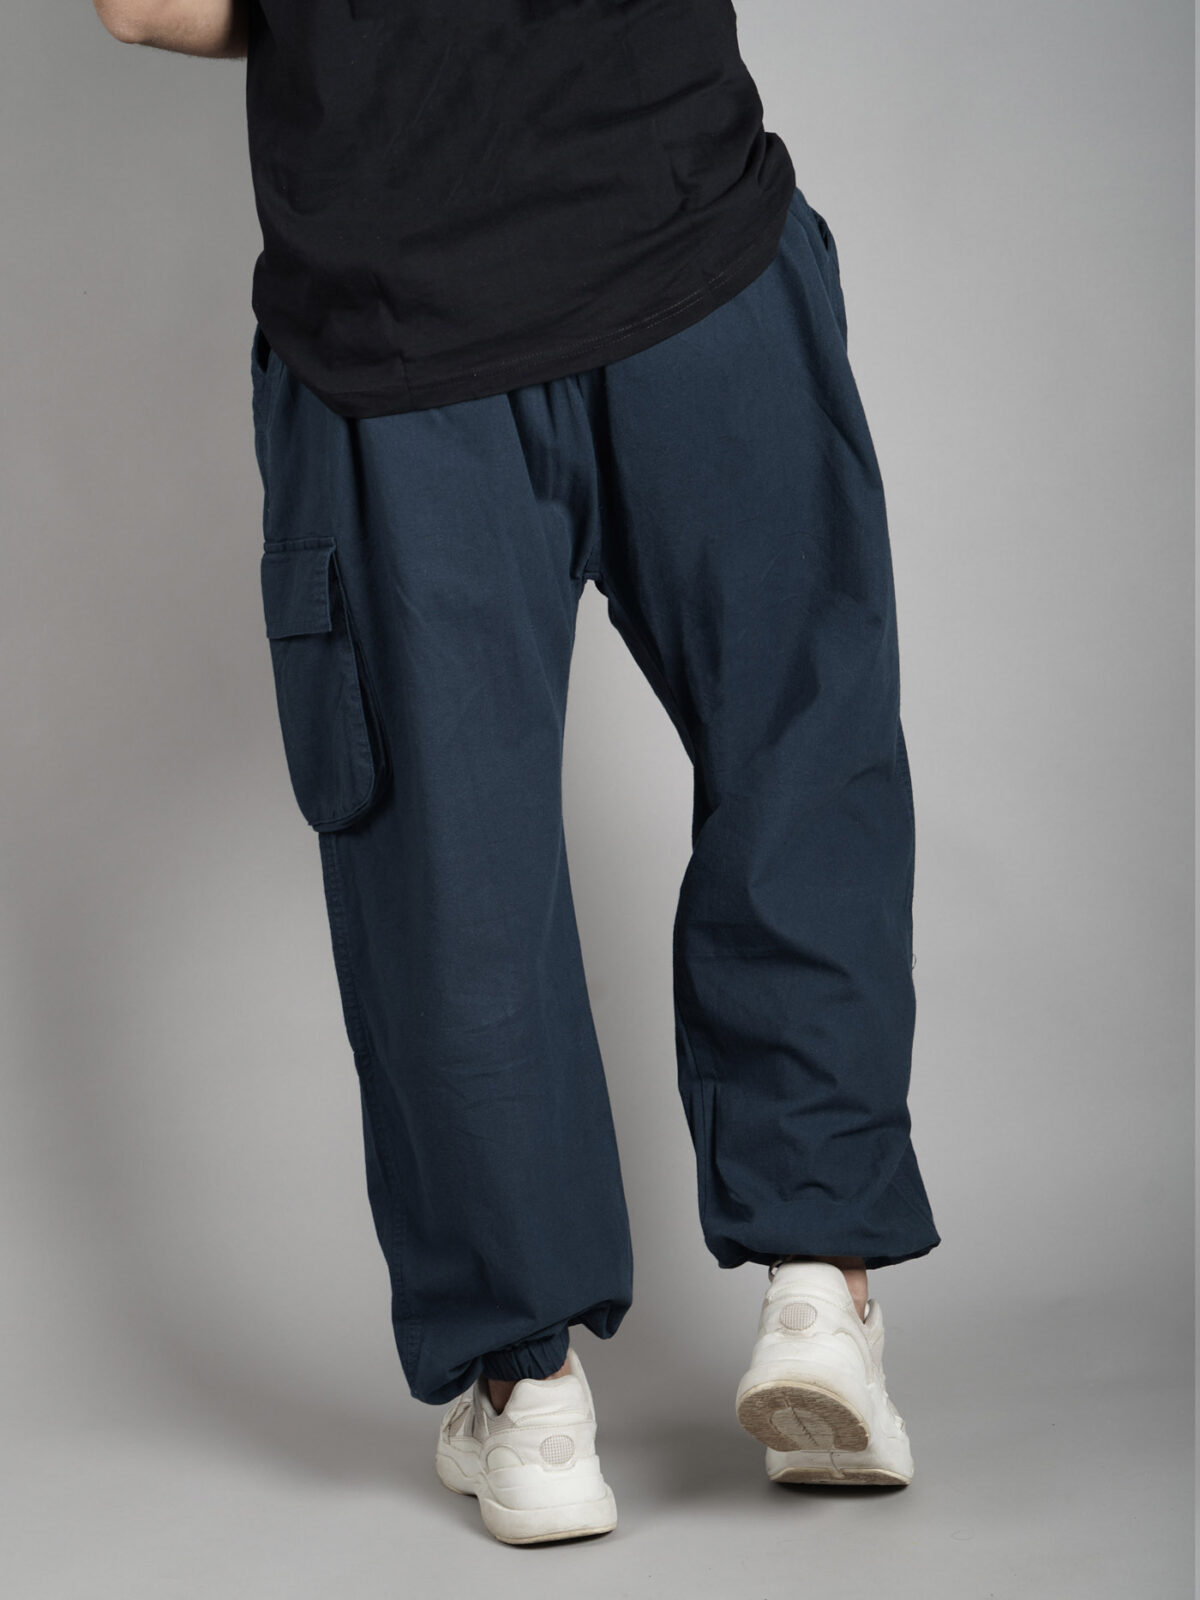 Solid Navy Blue Earthy Hoppers – Unisex Pants For Men And Women ...